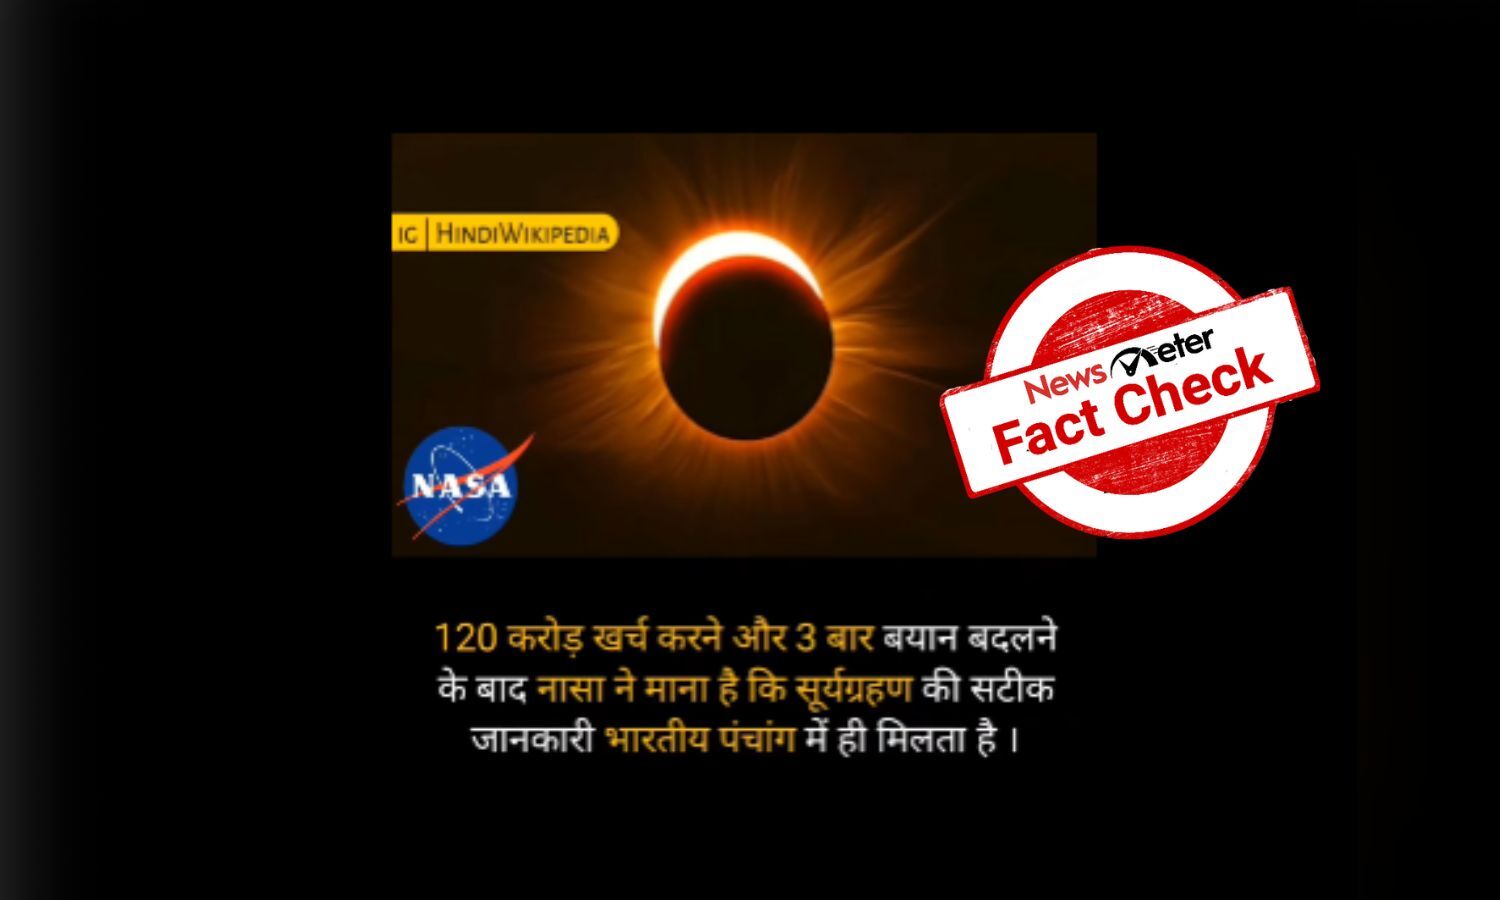 NASA did not say the Hindu calendar gives accurate information on solar